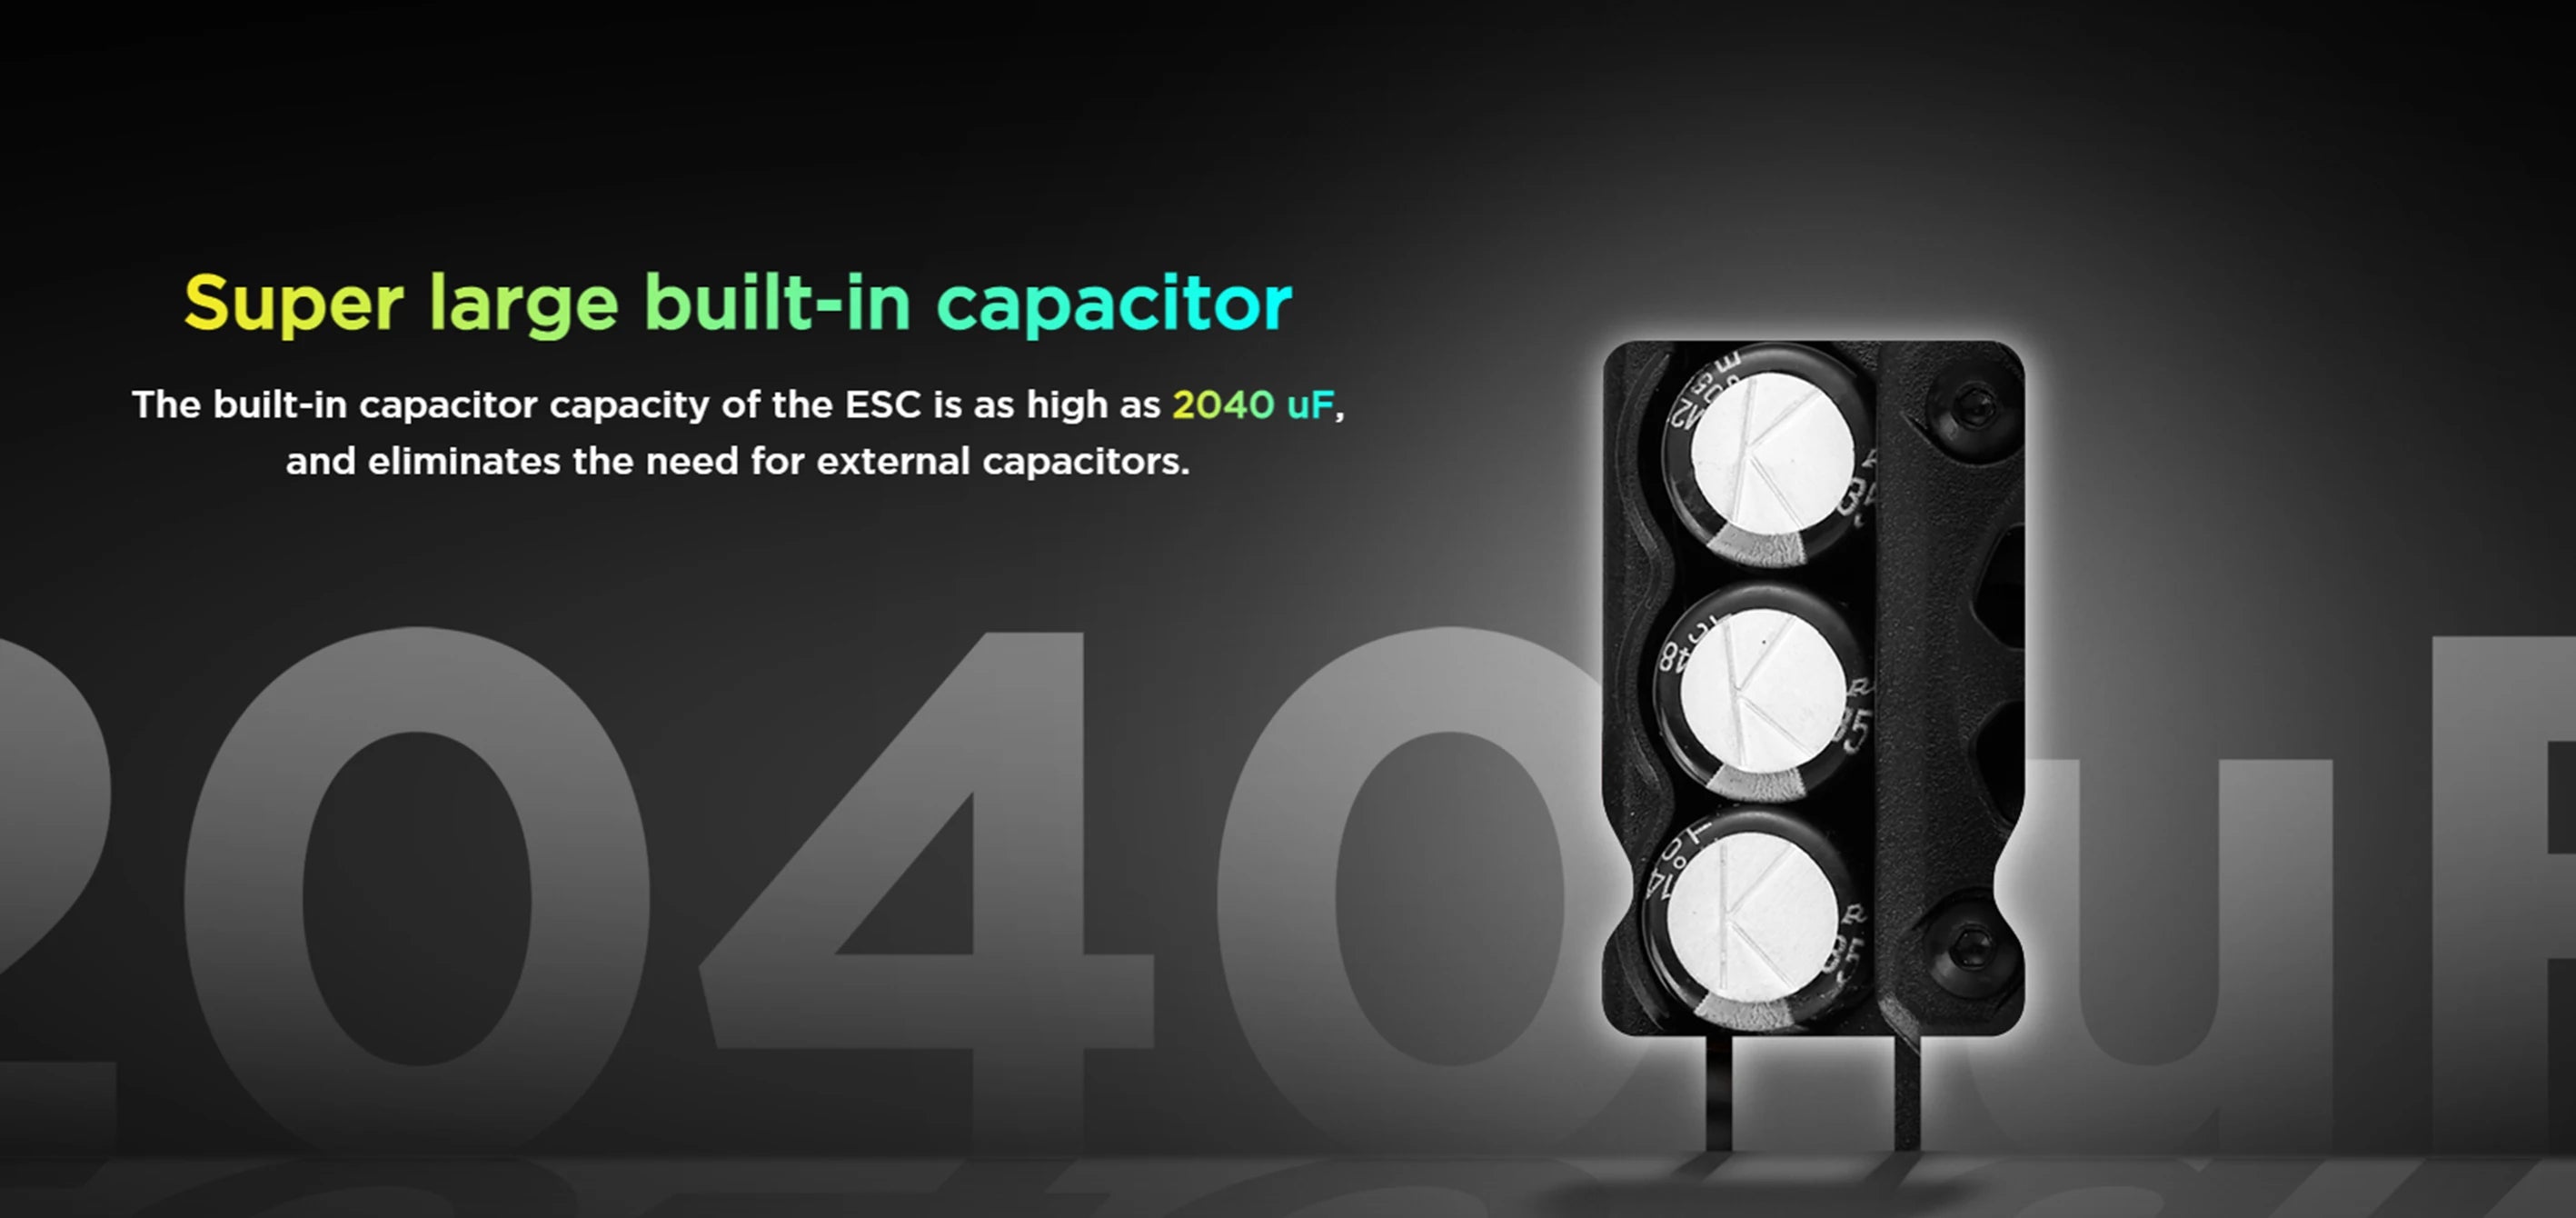 built-in capacitor capacity of the ESC is as high as 2040 uF 